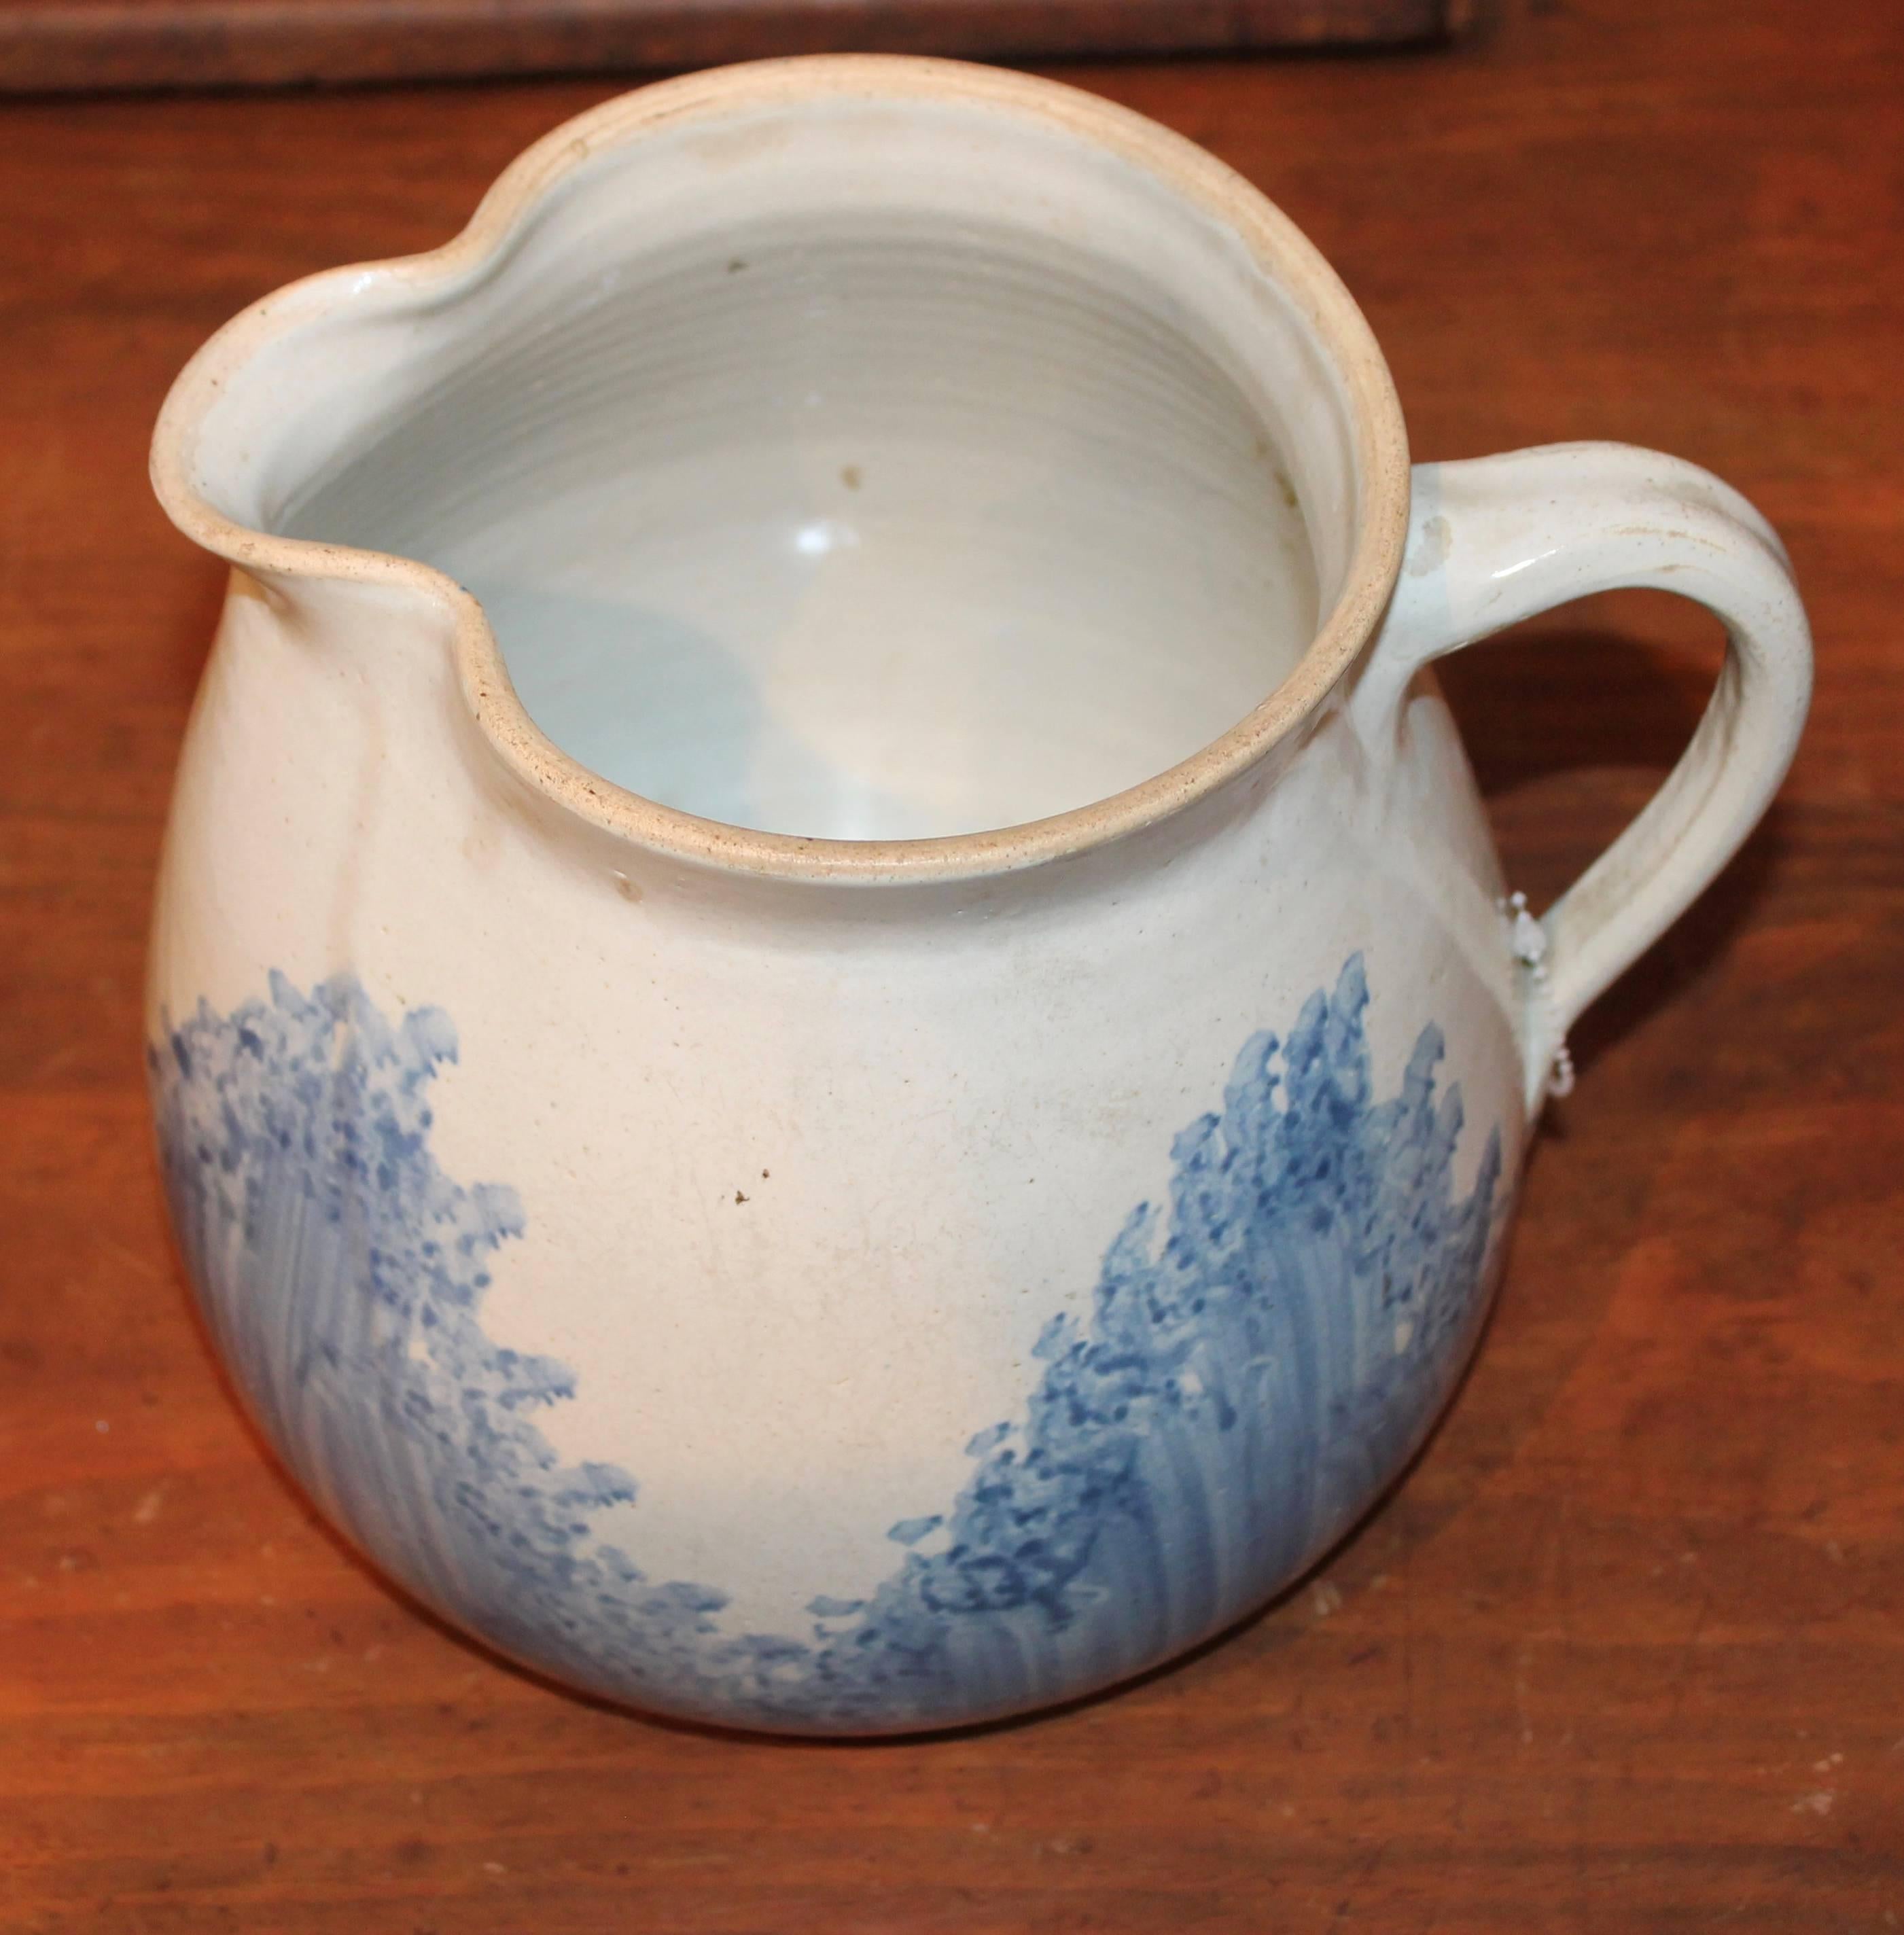 This 19th century pottery pitcher has a sponge like or spatter blue feather pattern in a salt glaze surface. The condition is very good.